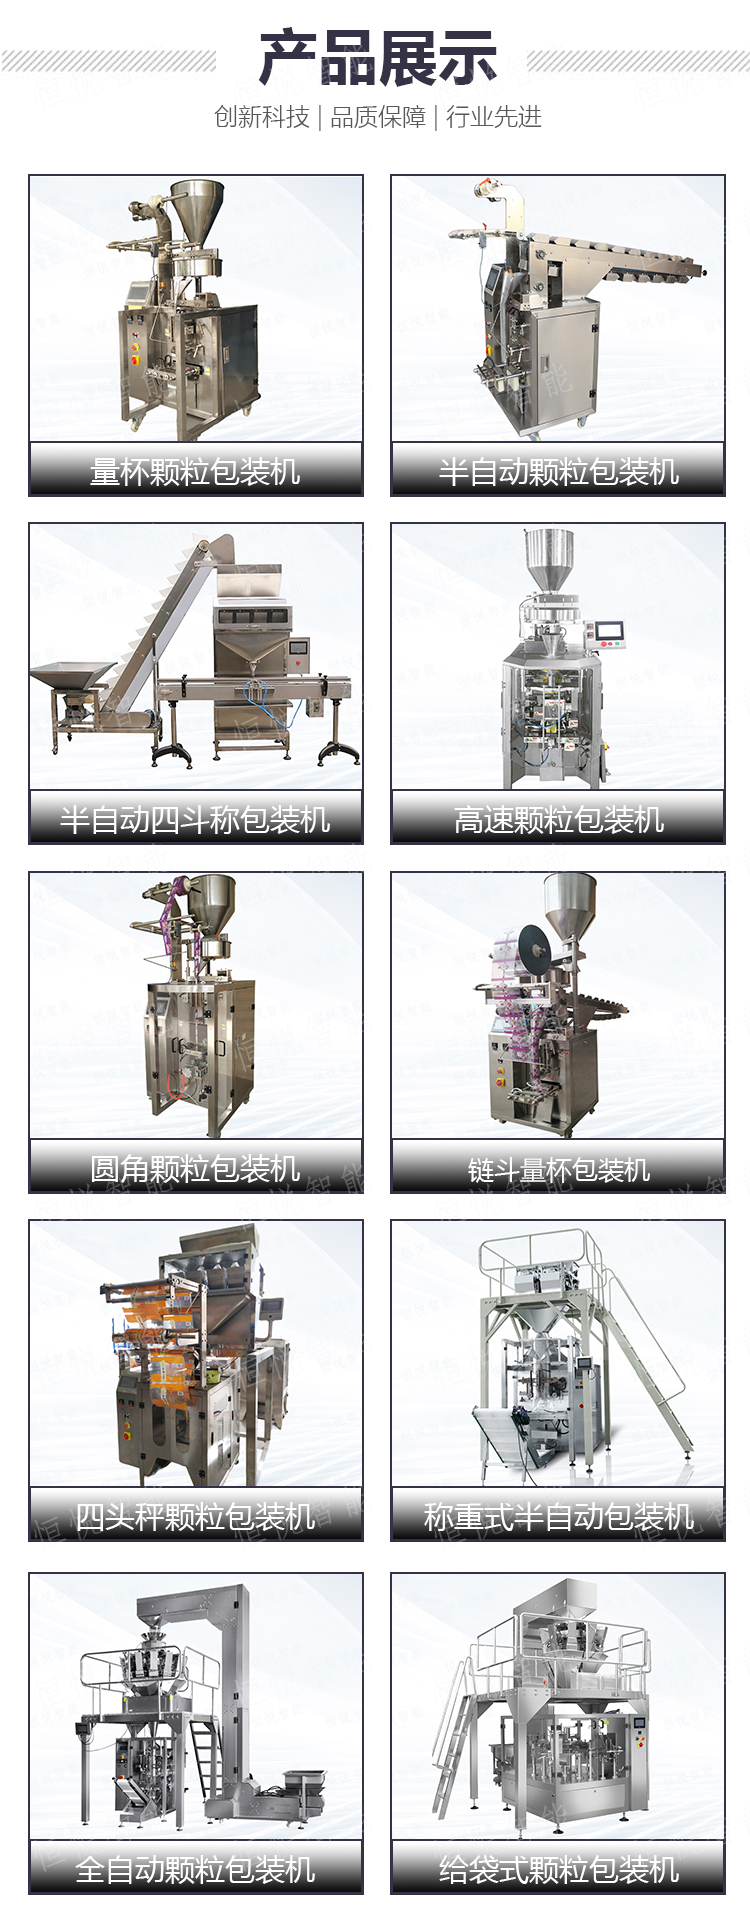 Automatic particle weighing and packaging machine, combined weighing and packaging production line, fully automatic quantitative packaging mechanical equipment